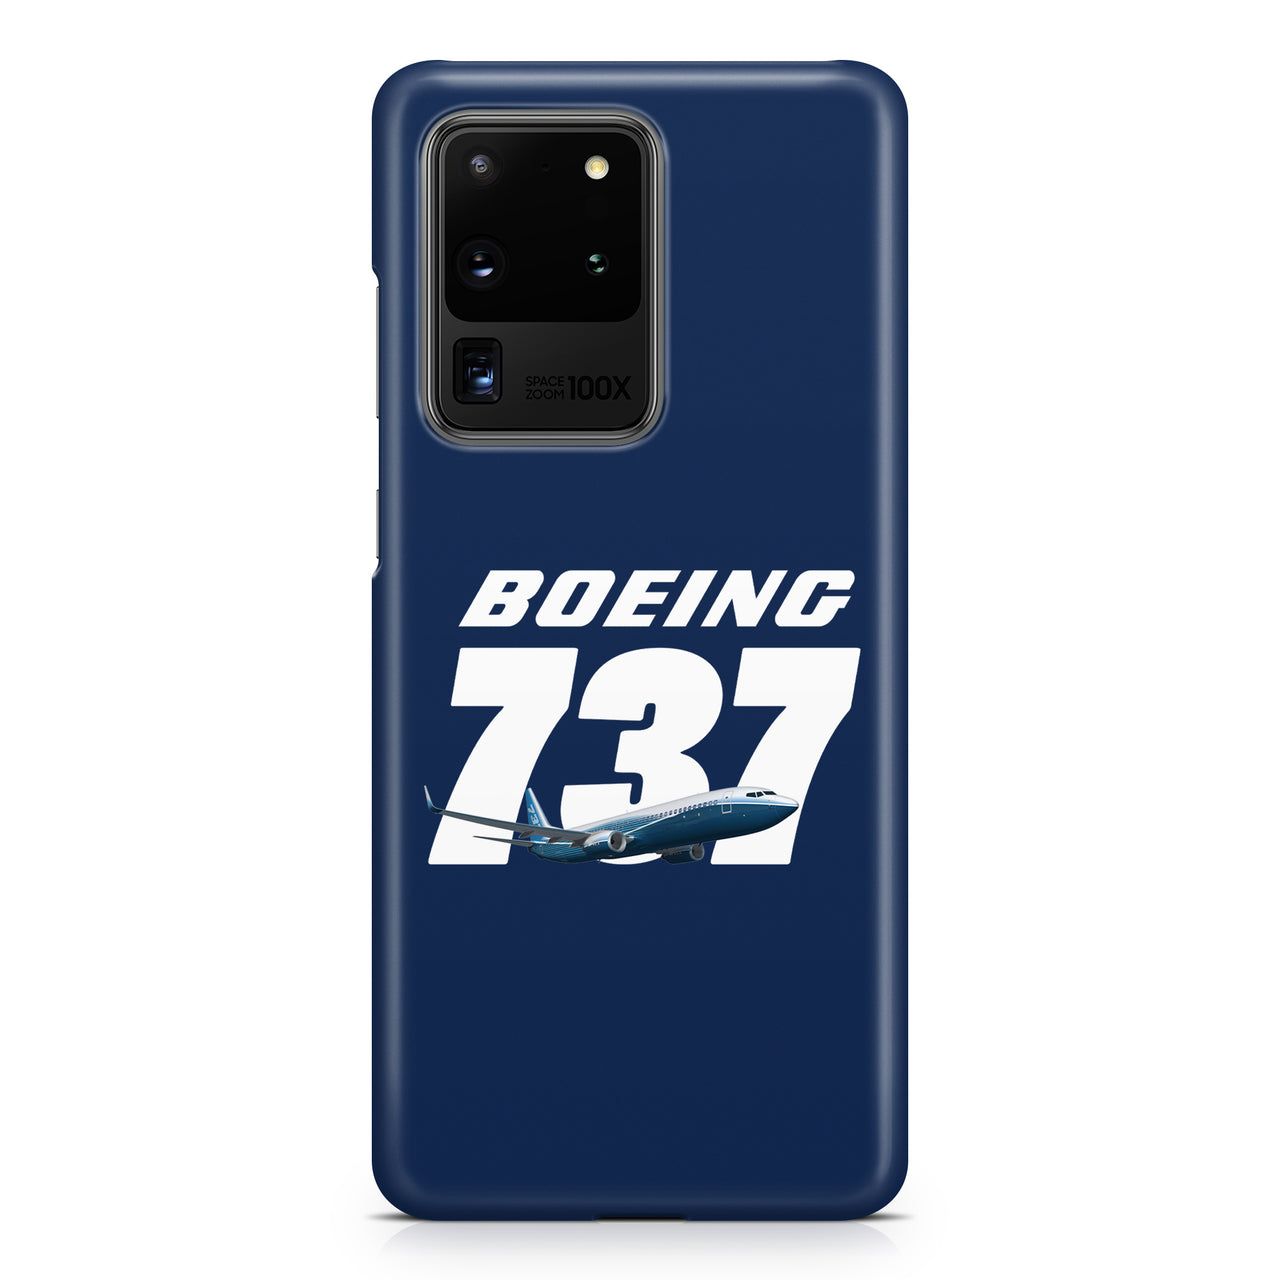 Super Boeing 737+Text Samsung A Cases